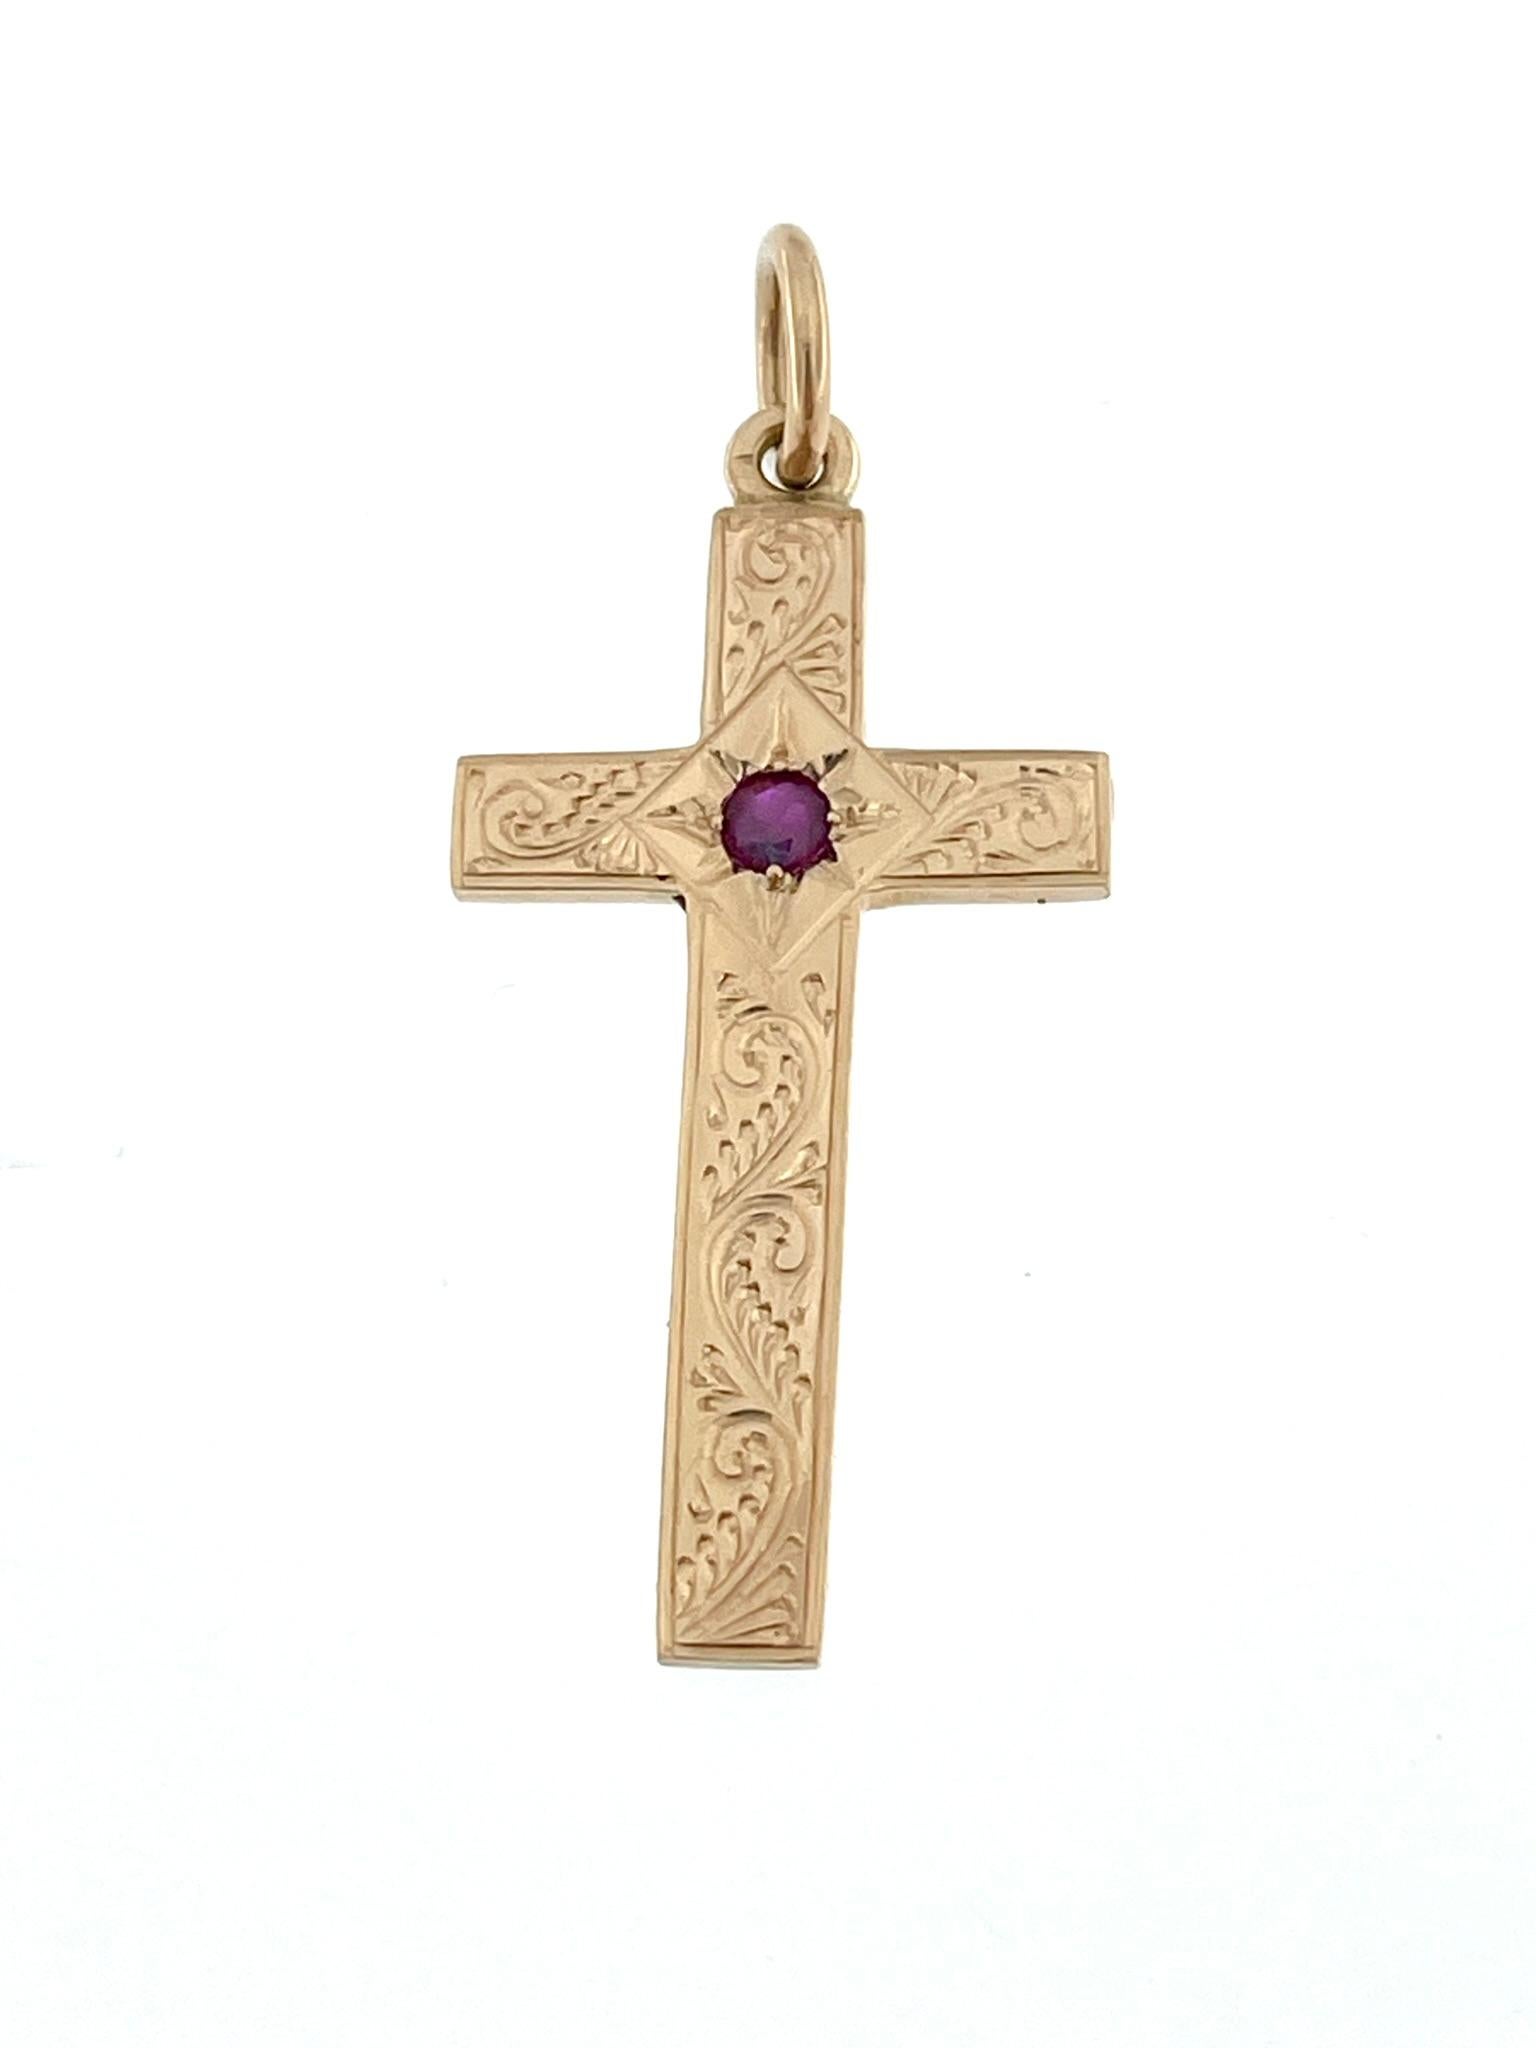 The Antique 14 karat Ruby German Cross is a captivating and historically rich religious pendant that showcases intricate craftsmanship and a unique design. This vintage piece features a central ruby as its focal point, surrounded by detailed relief